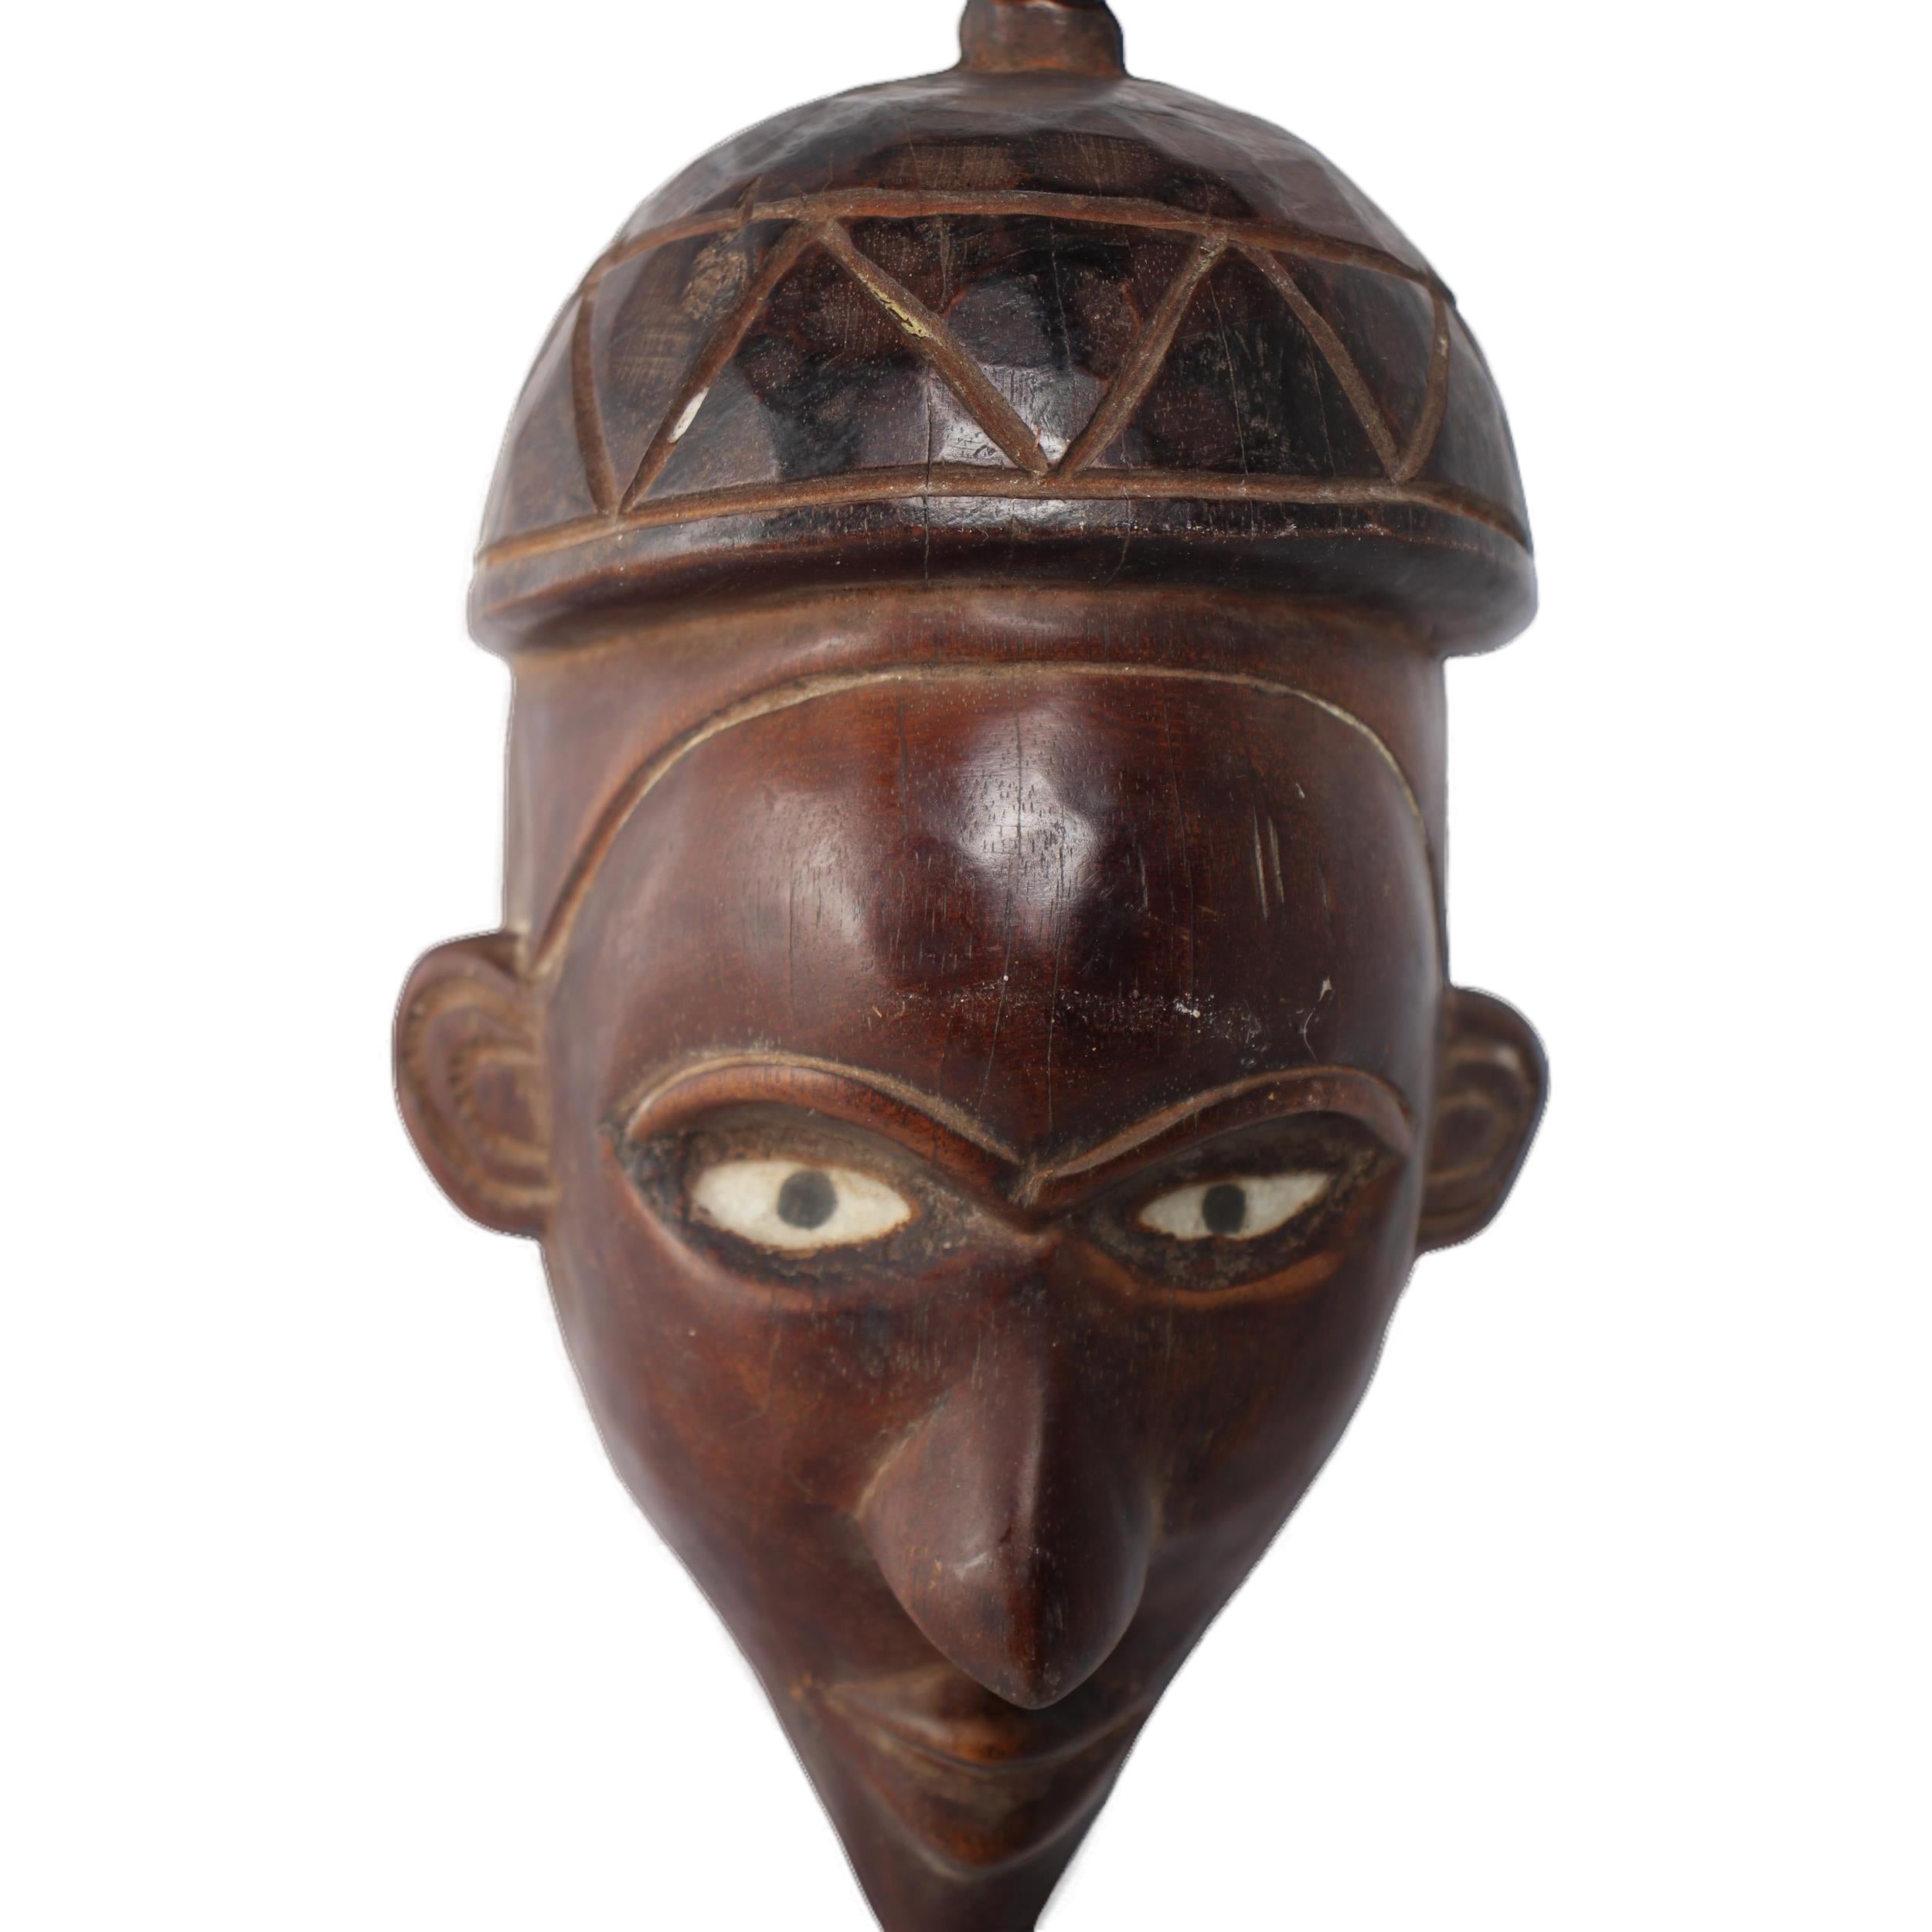 Pende Tribe Mask ~8.7" Tall